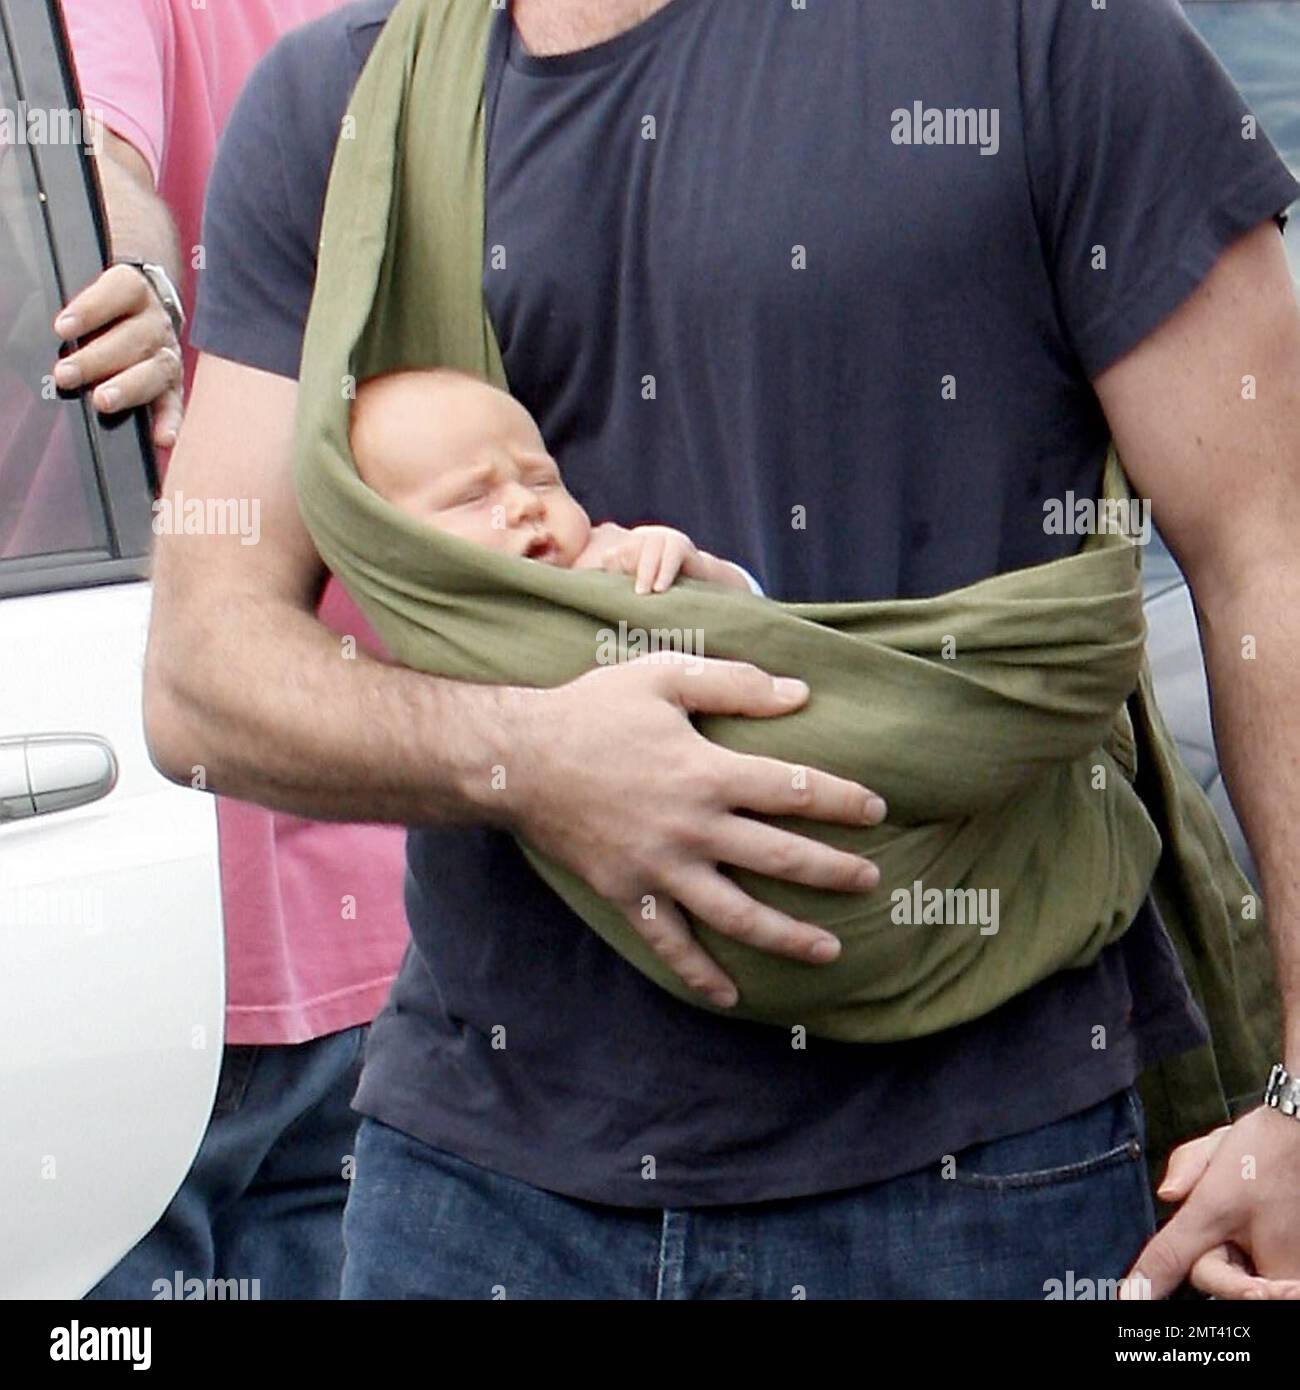 Naomi Watts, Liev Schreiber and newborn son Alexander Pete take a morning stroll to get some breakfast. Naomi and liev held hands as Liev cradled Alexander in a sling. Venice Beach, Calif. 8/25/07.All   /Patrick Mehdi. Stock Photo